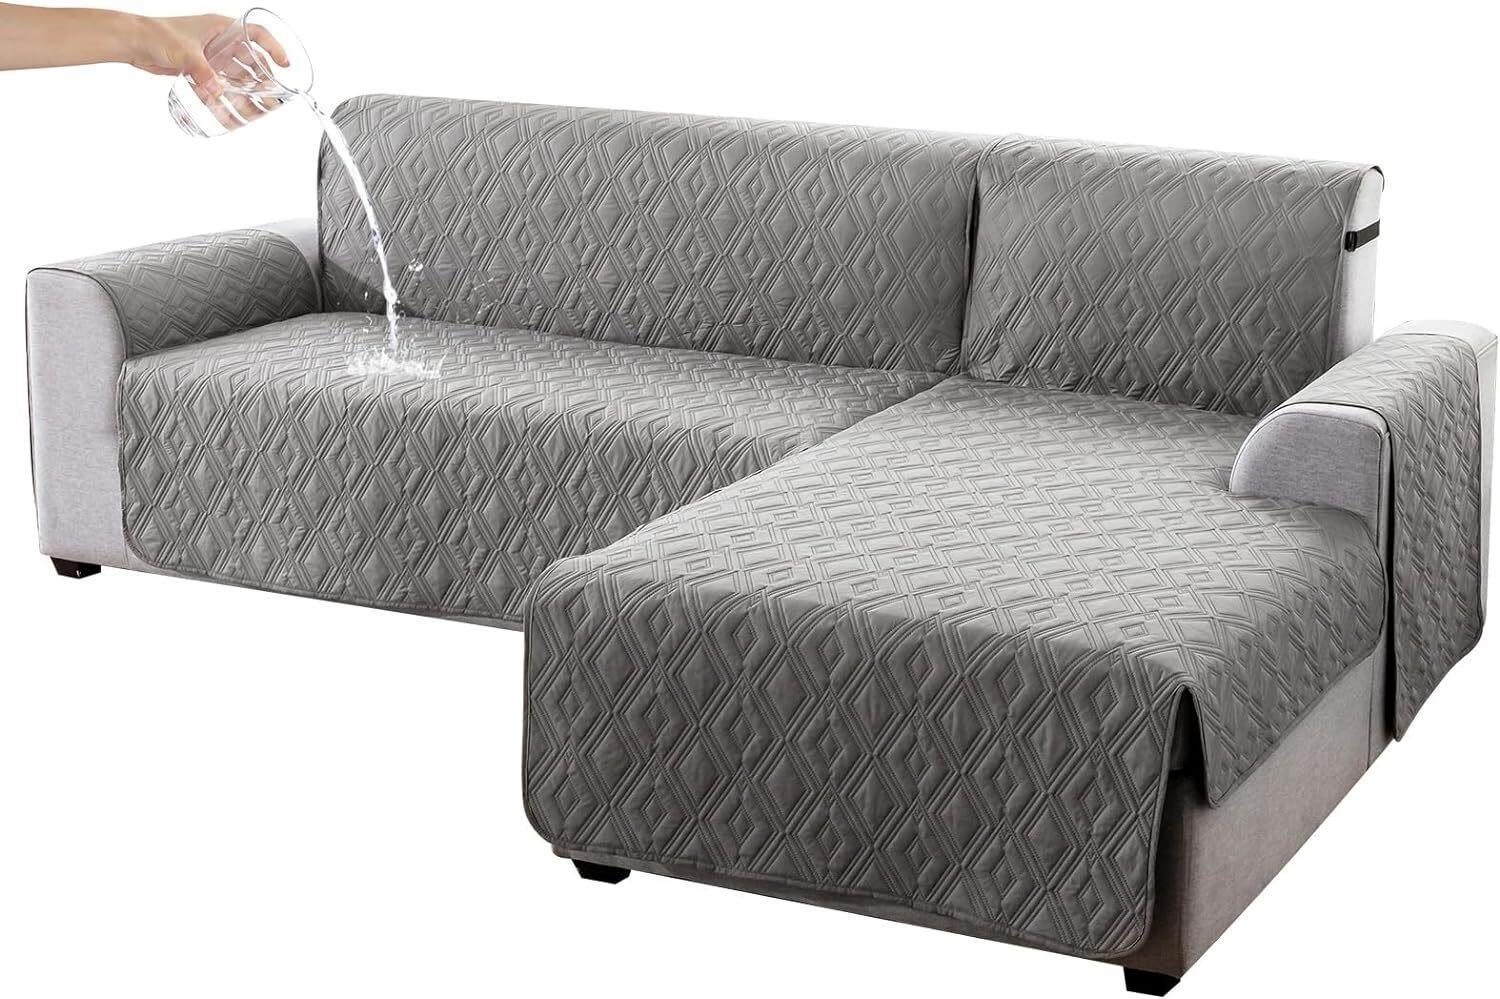 Genina Sectional Couch Covers for Dogs (Gray)